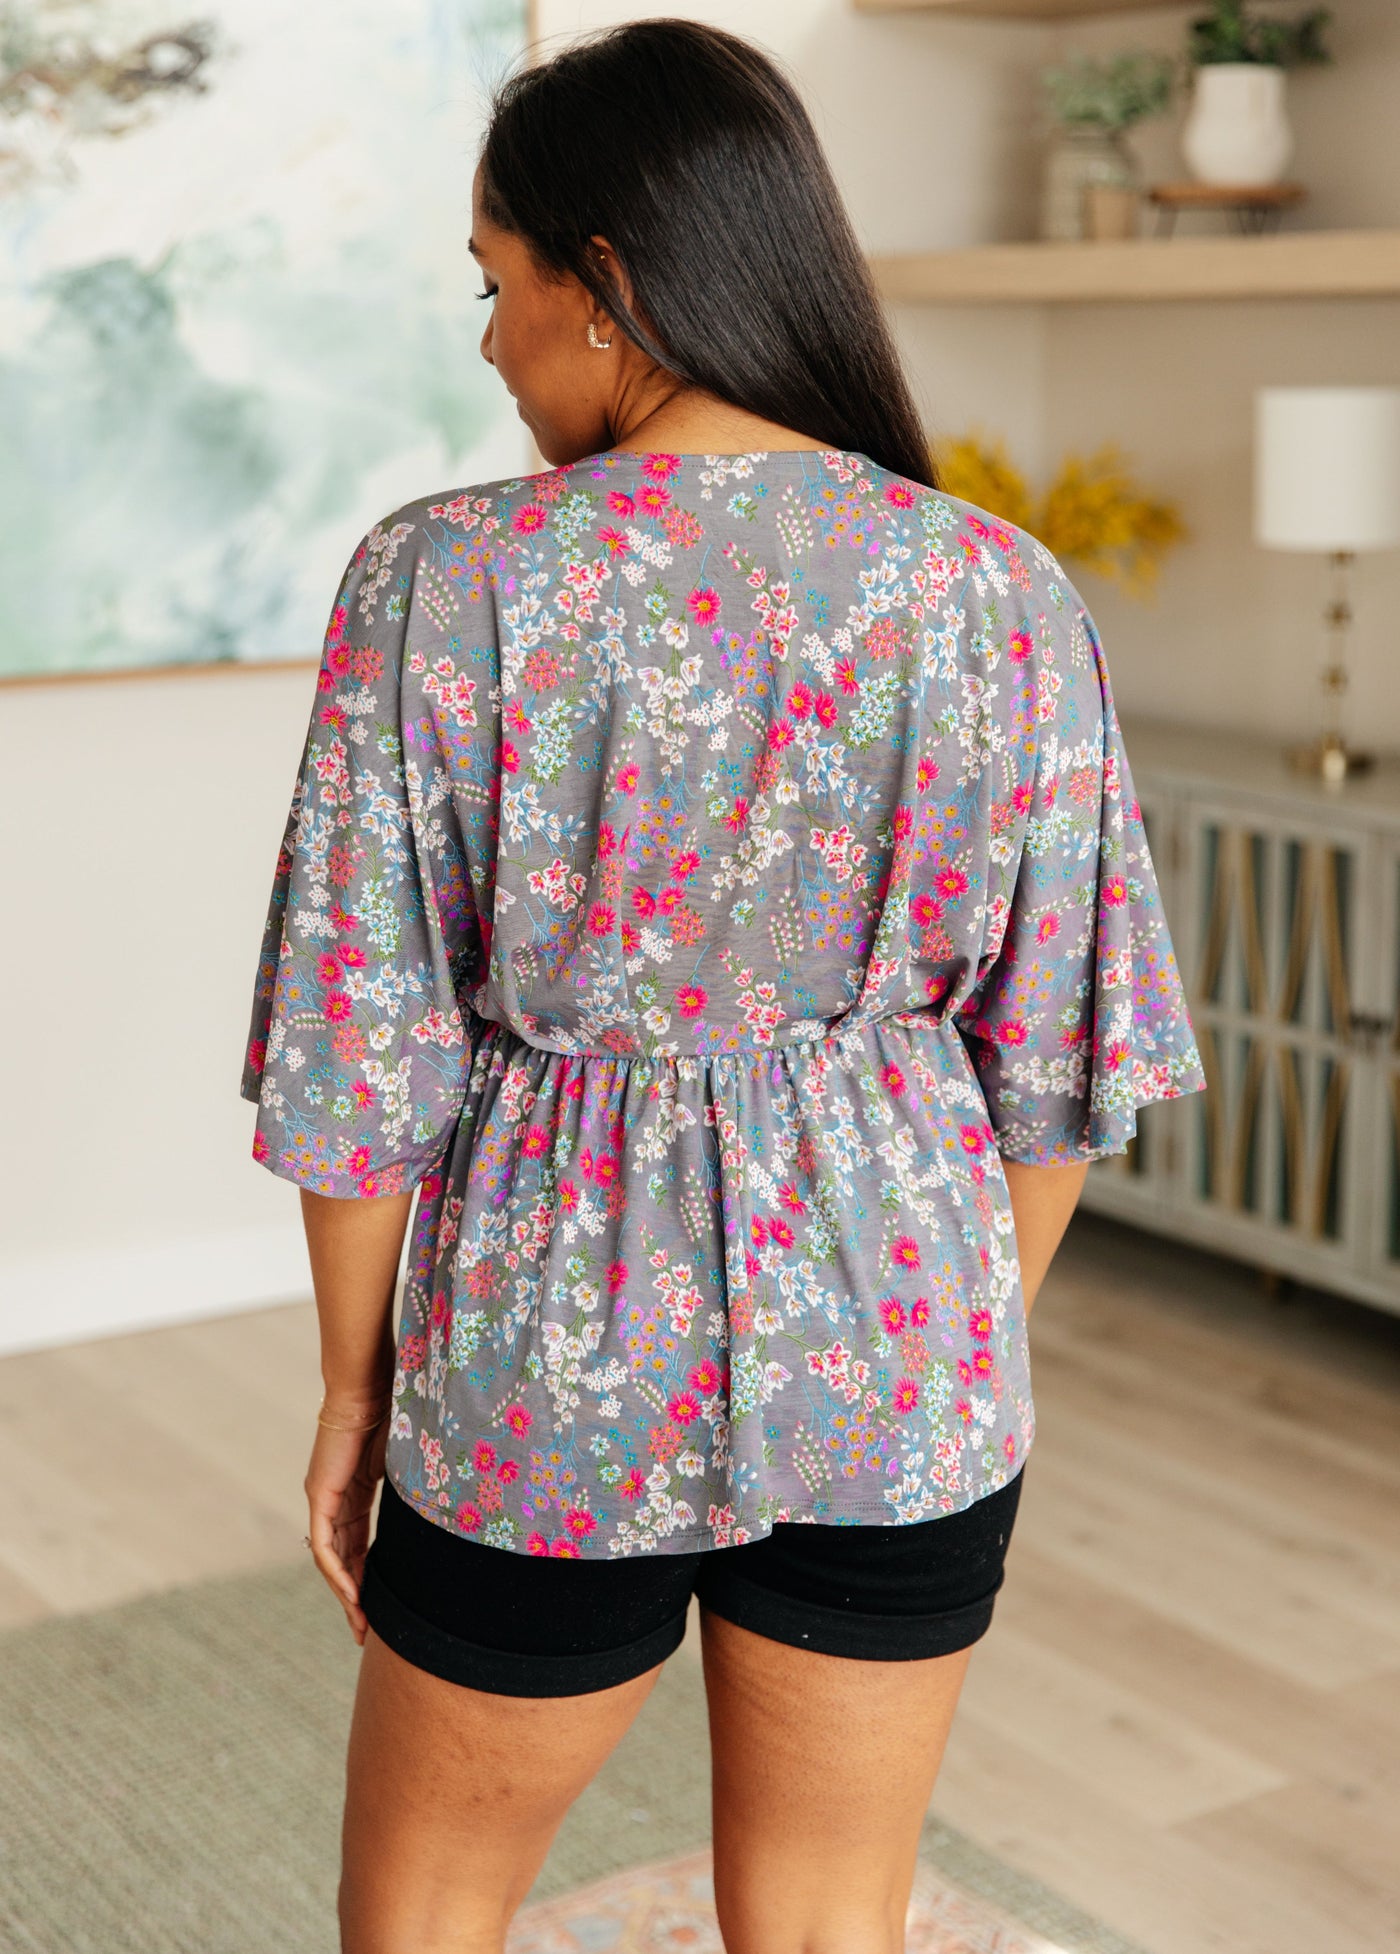 Dreamer Peplum Top in Grey and Pink Floral-Tops-Ave Shops-Market Street Nest, Fashionable Clothing, Shoes and Home Décor Located in Mabank, TX